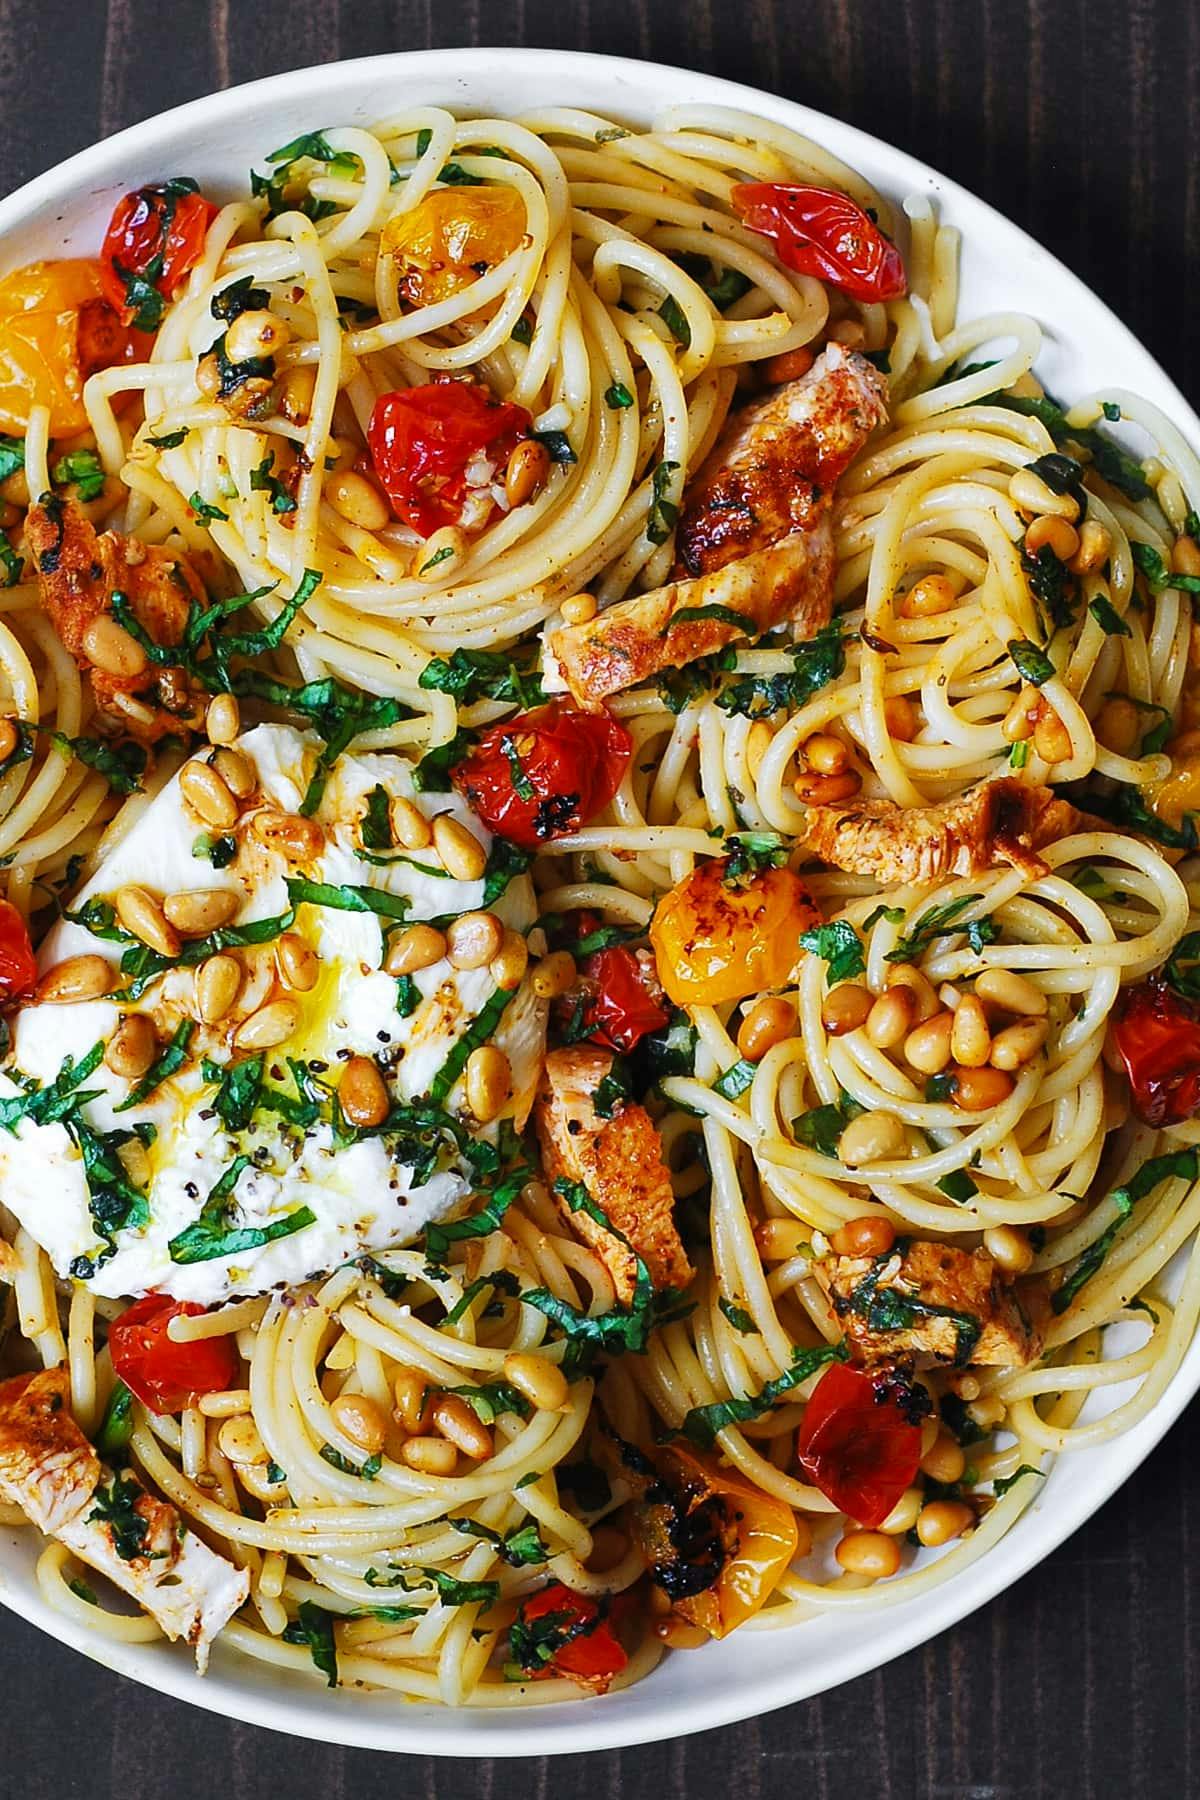 Chicken Spaghetti with Burrata Cheese, Cherry Tomatoes, Pine Nuts, and Lemon Butter Garlic Sauce